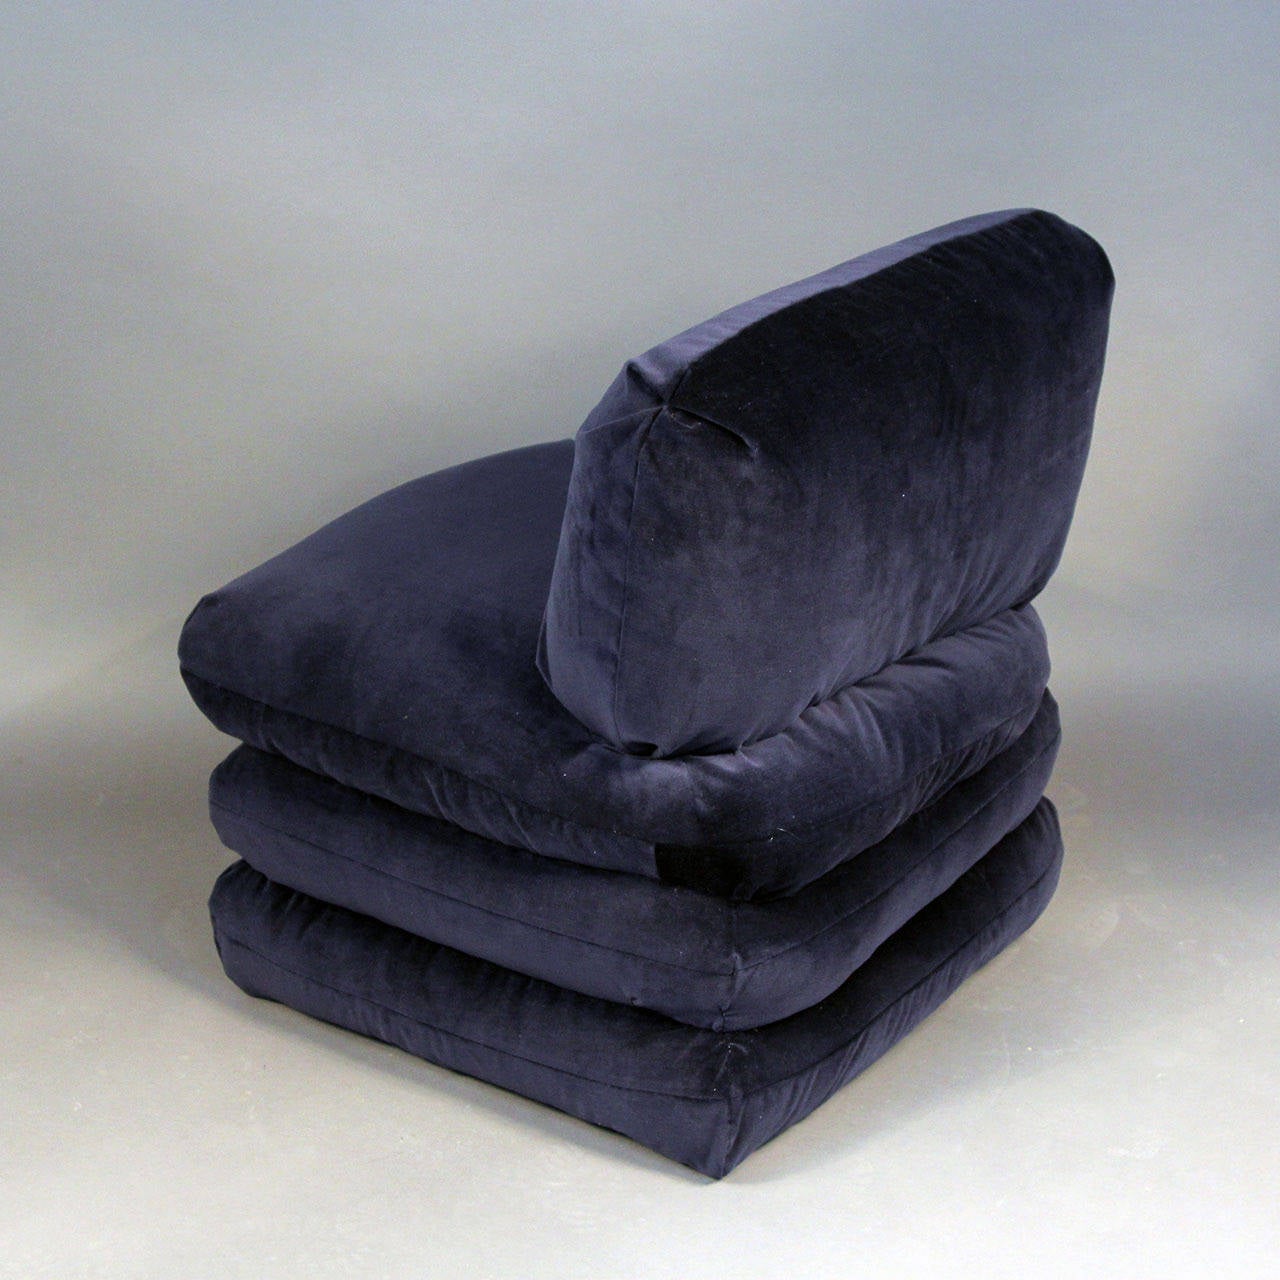 Vice Versa for Donghia Pair of Slipper Chairs In Excellent Condition For Sale In Bridport, CT